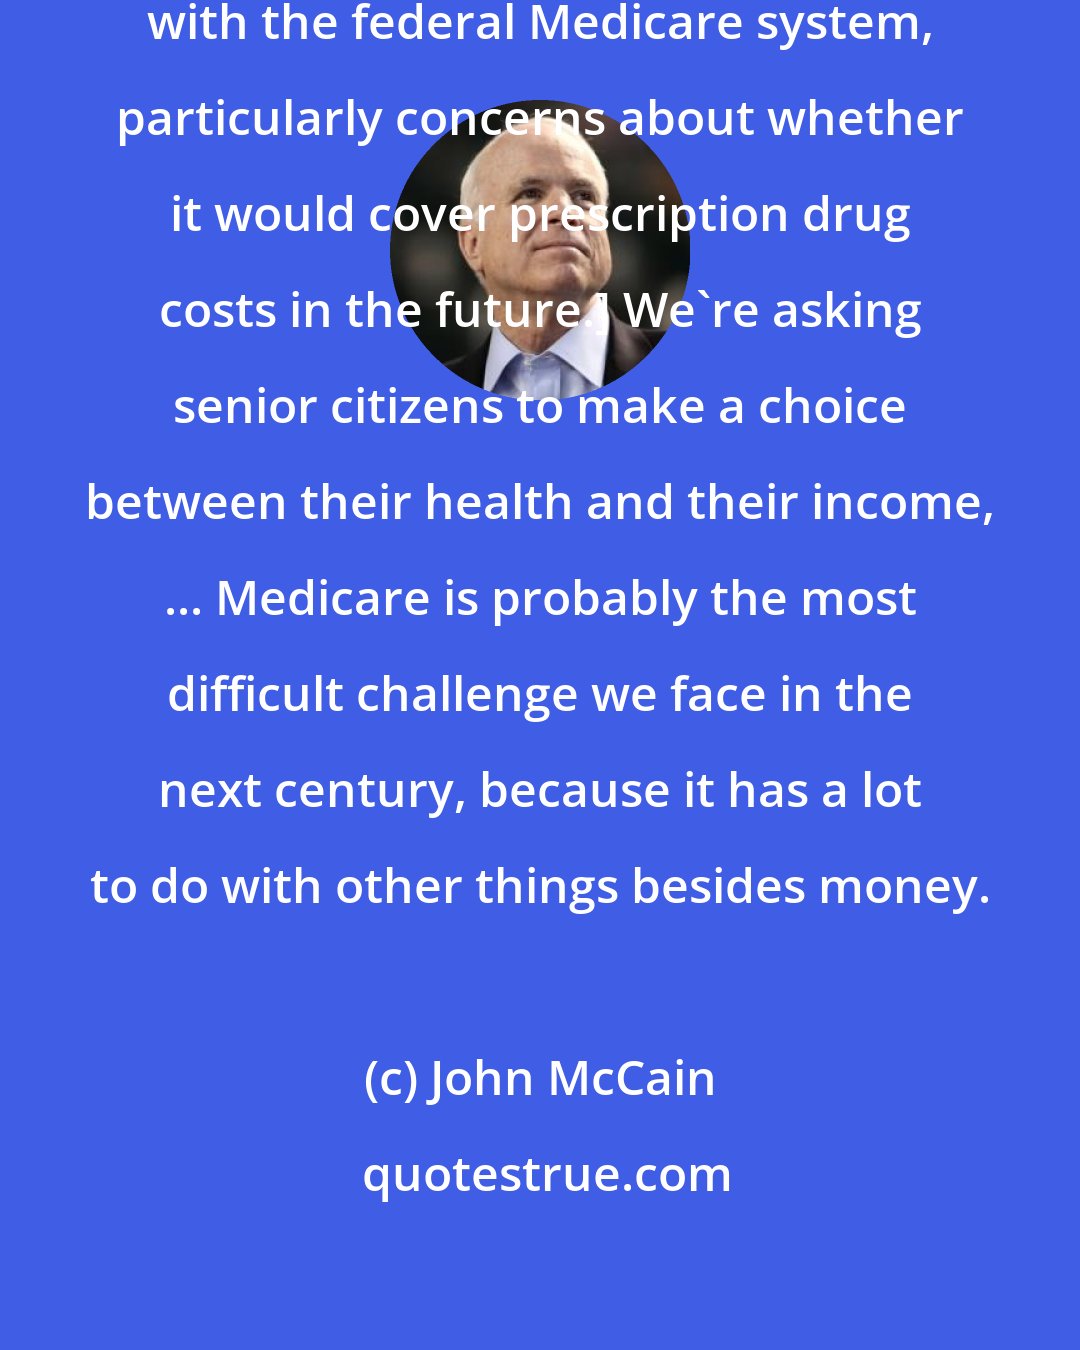 John McCain: [Several candidates talked of problems with the federal Medicare system, particularly concerns about whether it would cover prescription drug costs in the future.] We're asking senior citizens to make a choice between their health and their income, ... Medicare is probably the most difficult challenge we face in the next century, because it has a lot to do with other things besides money.